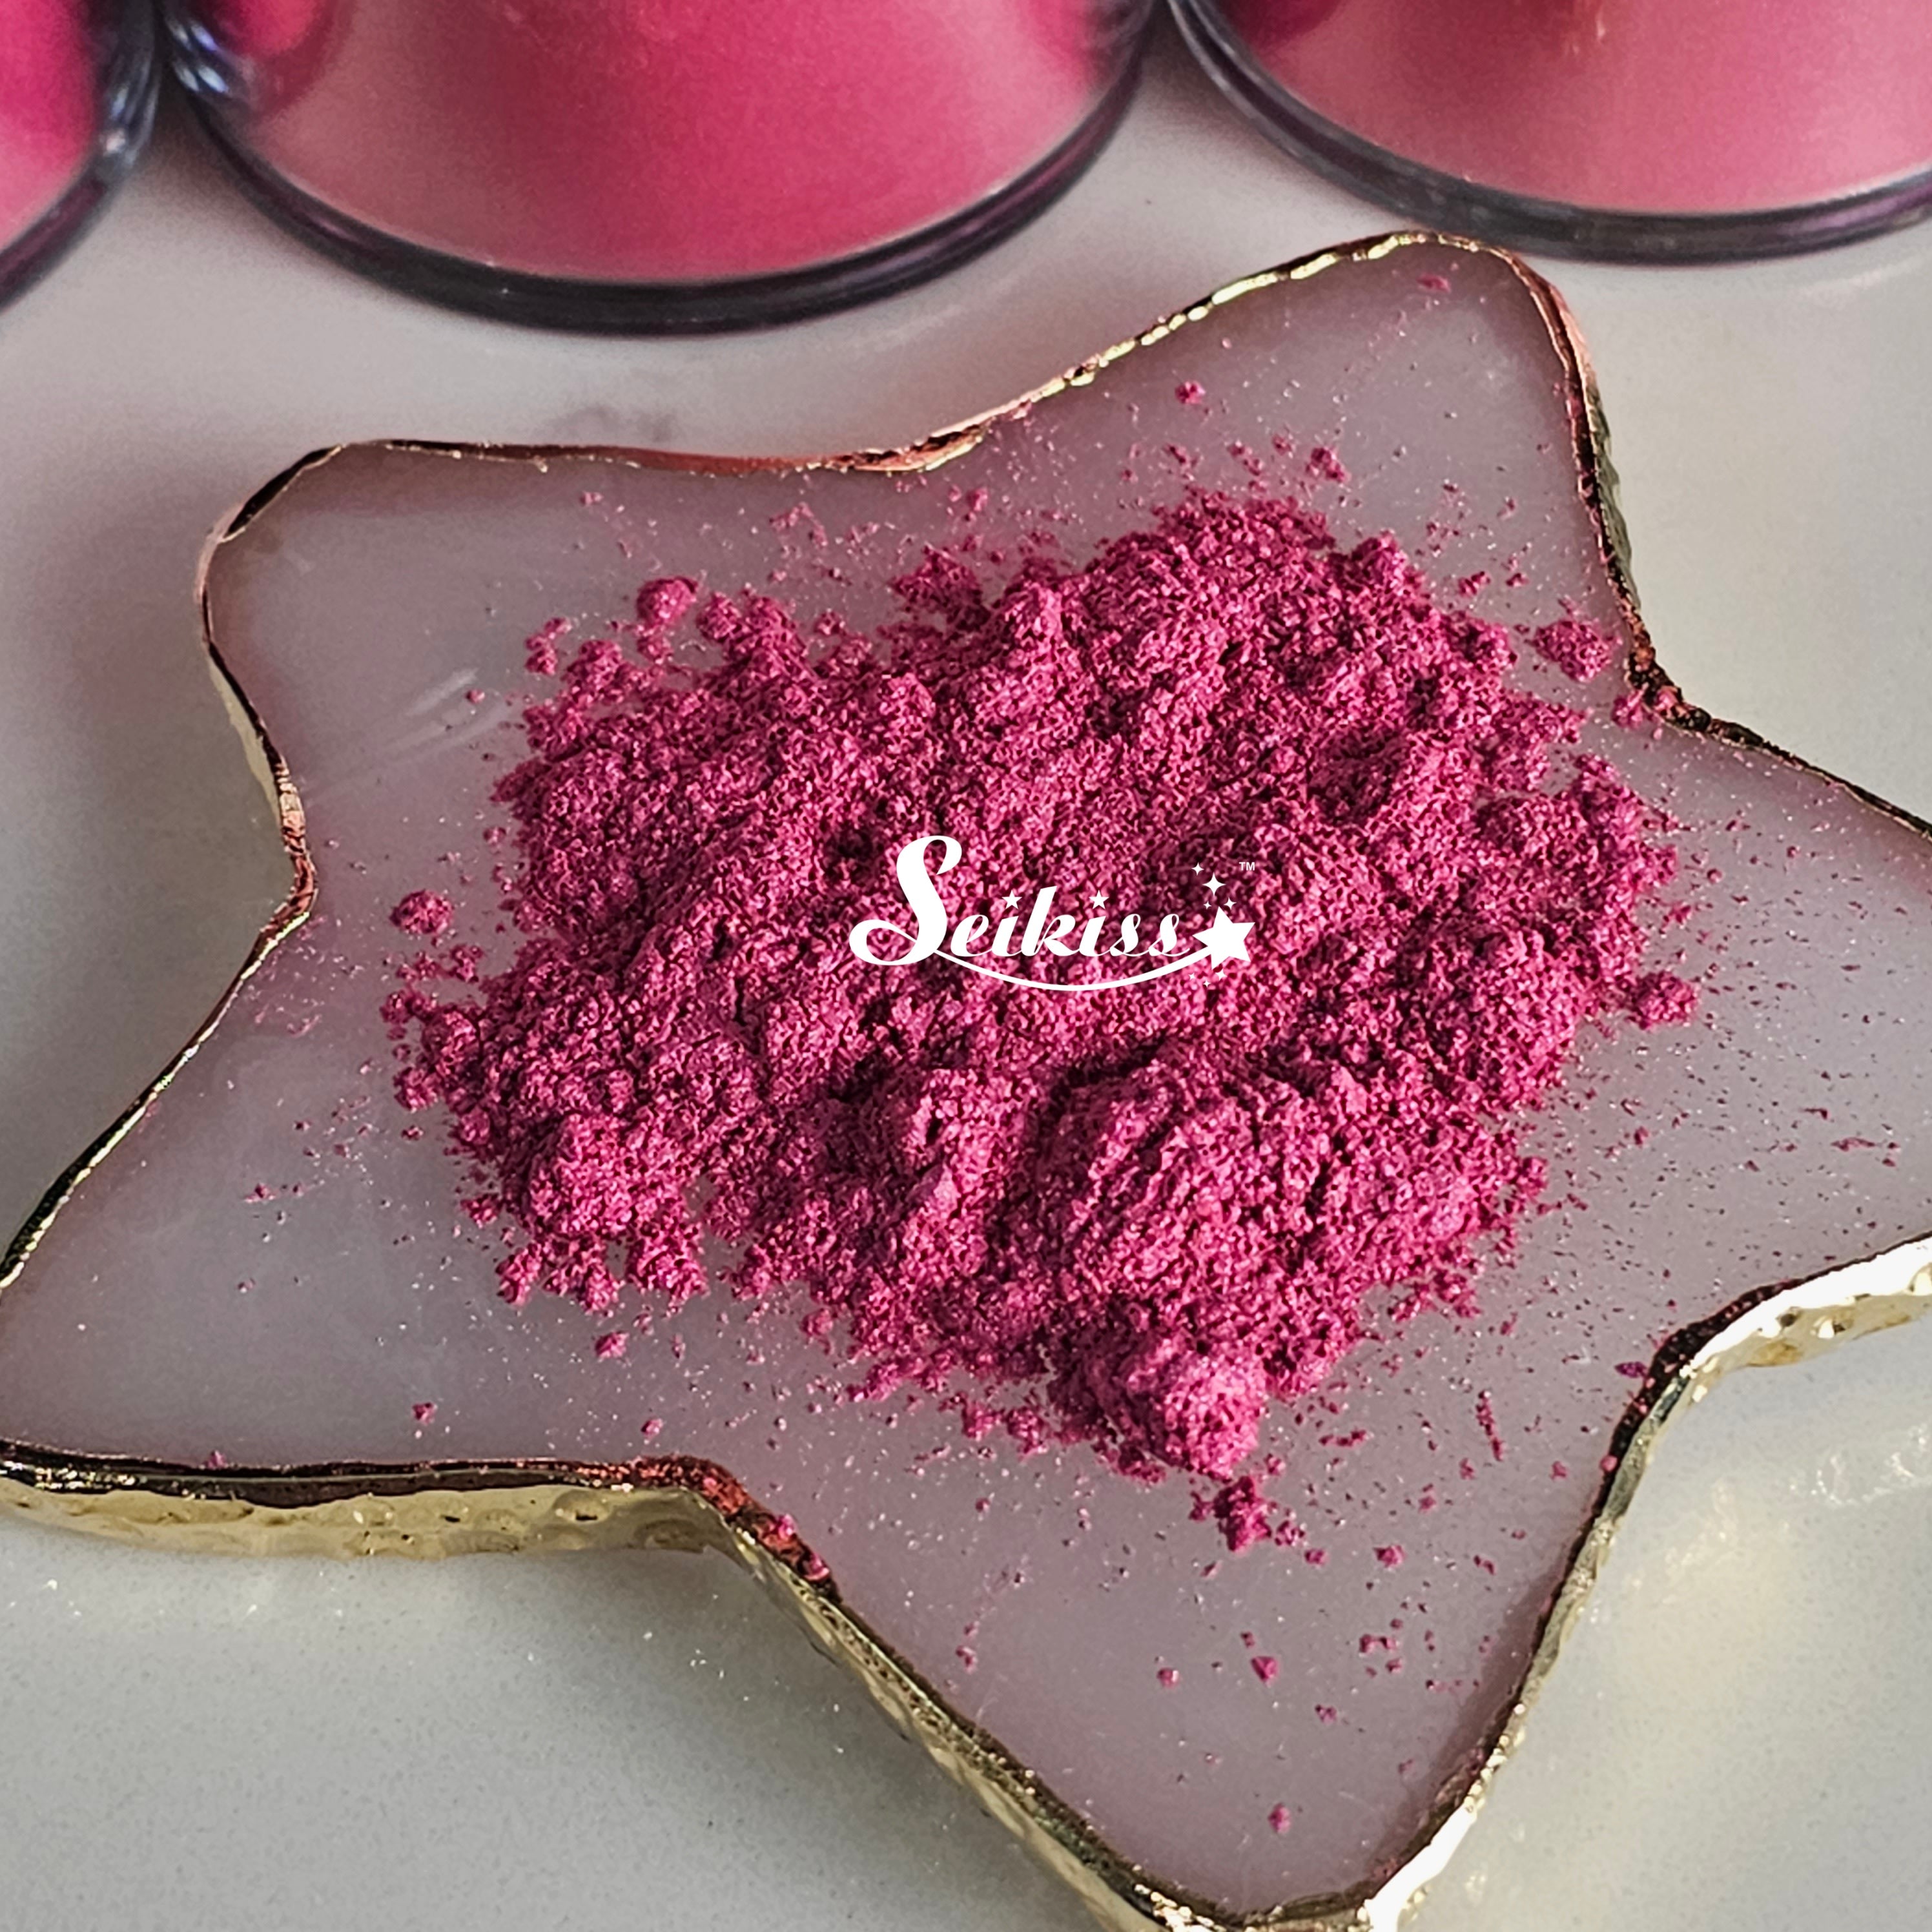 Berry Fuchsia Mica Powder for Resin, Alcohol Ink, Epoxy, Wax Melts - Pink Mica